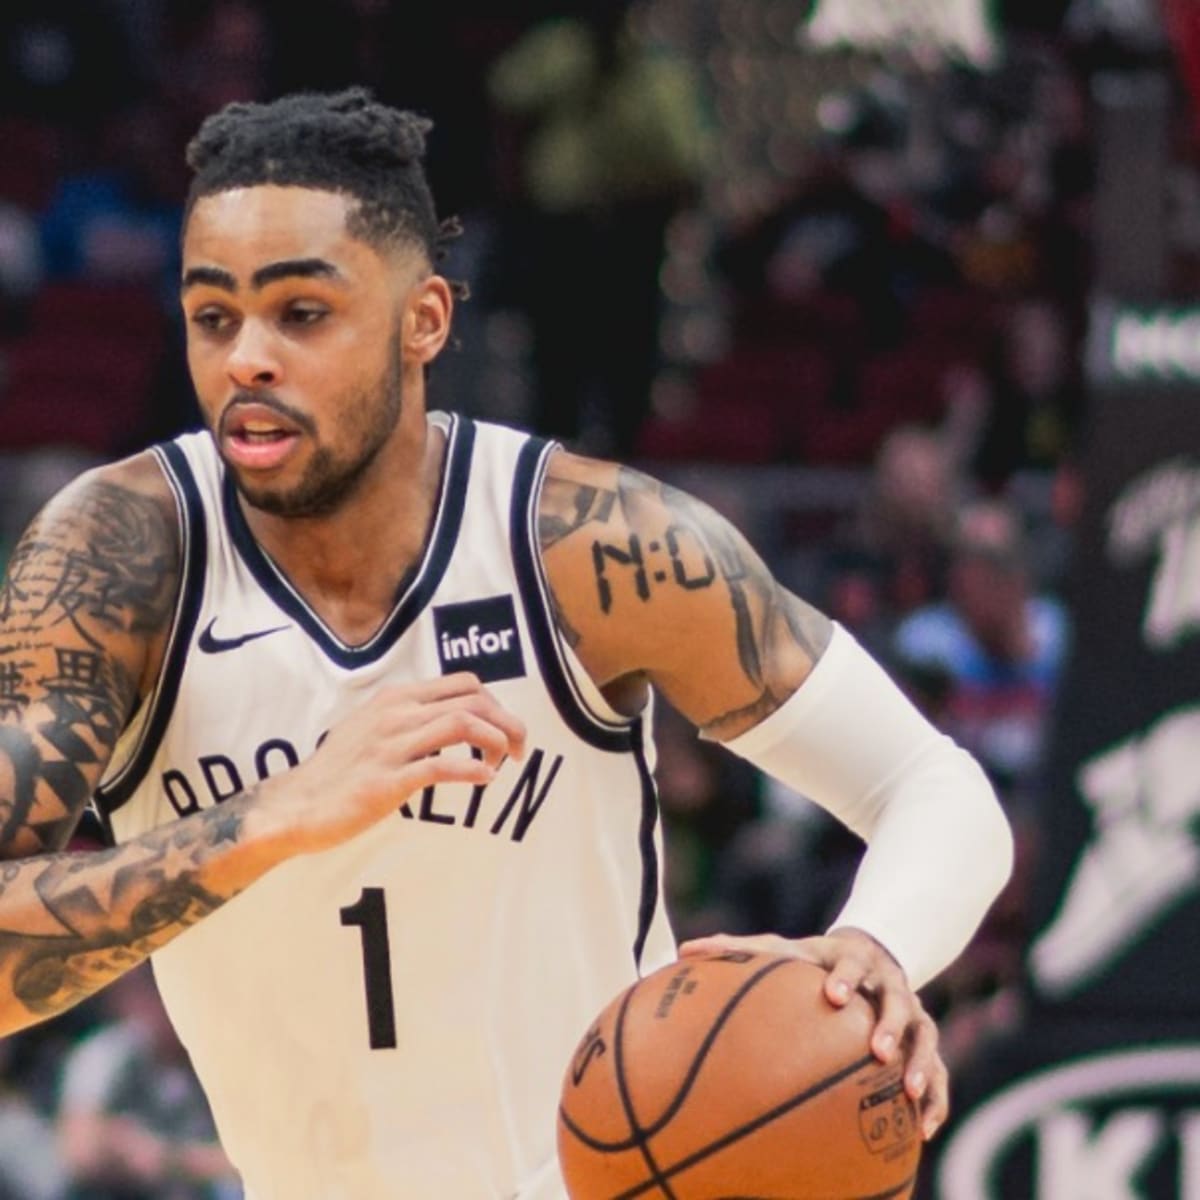 Brooklyn Nets: Legend of D'Angelo Russell gets a new chapter